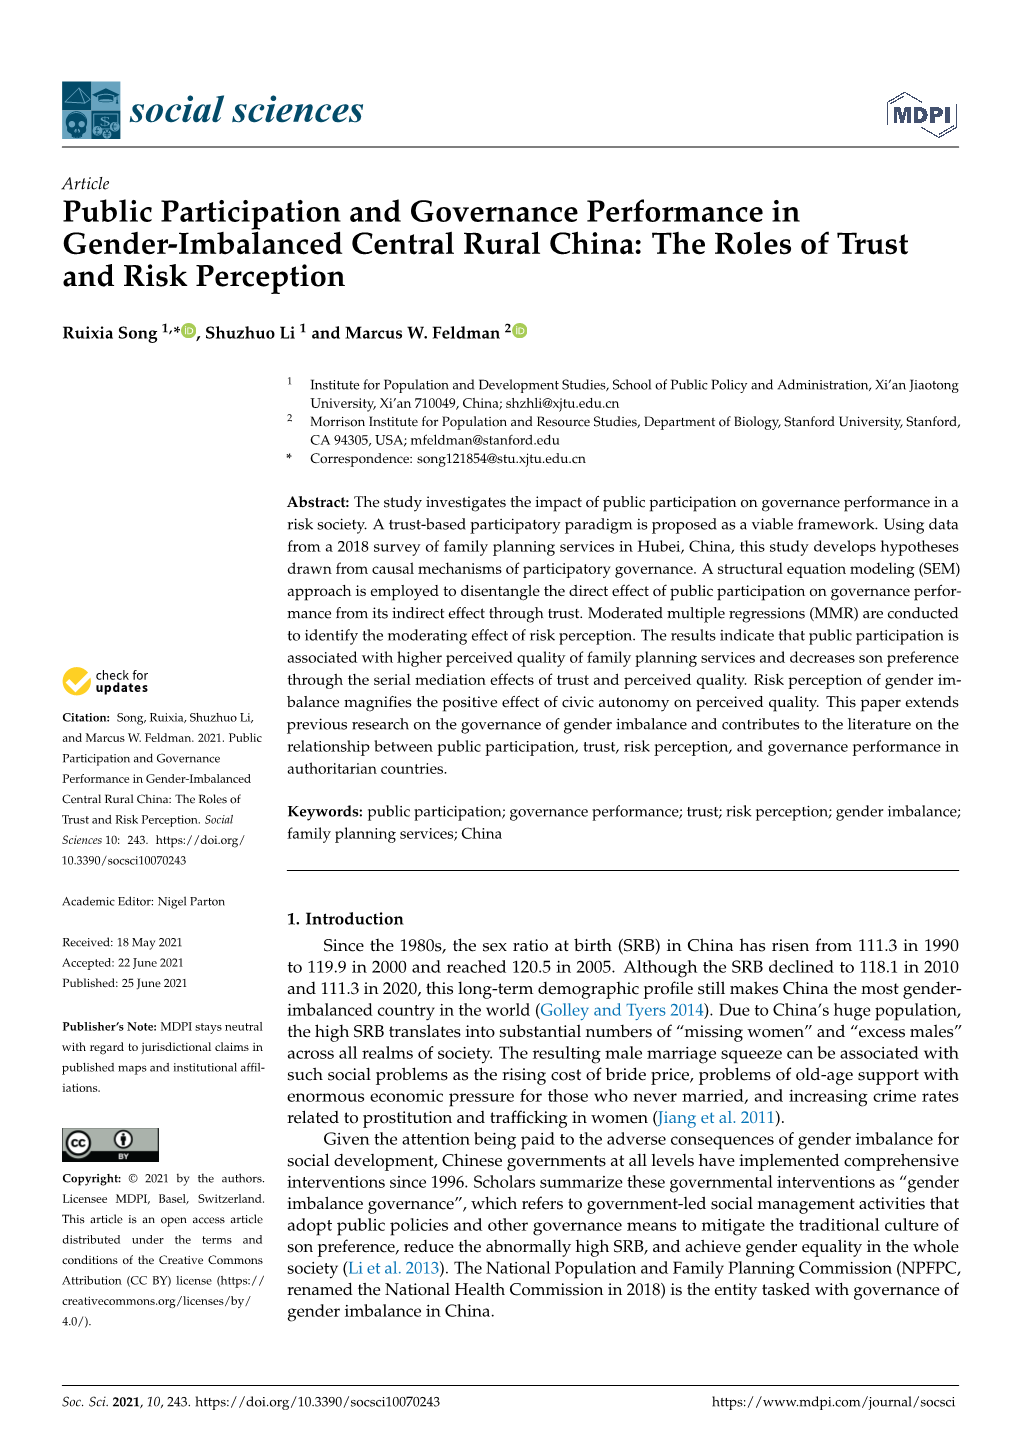 Public Participation and Governance Performance in Gender-Imbalanced Central Rural China: the Roles of Trust and Risk Perception